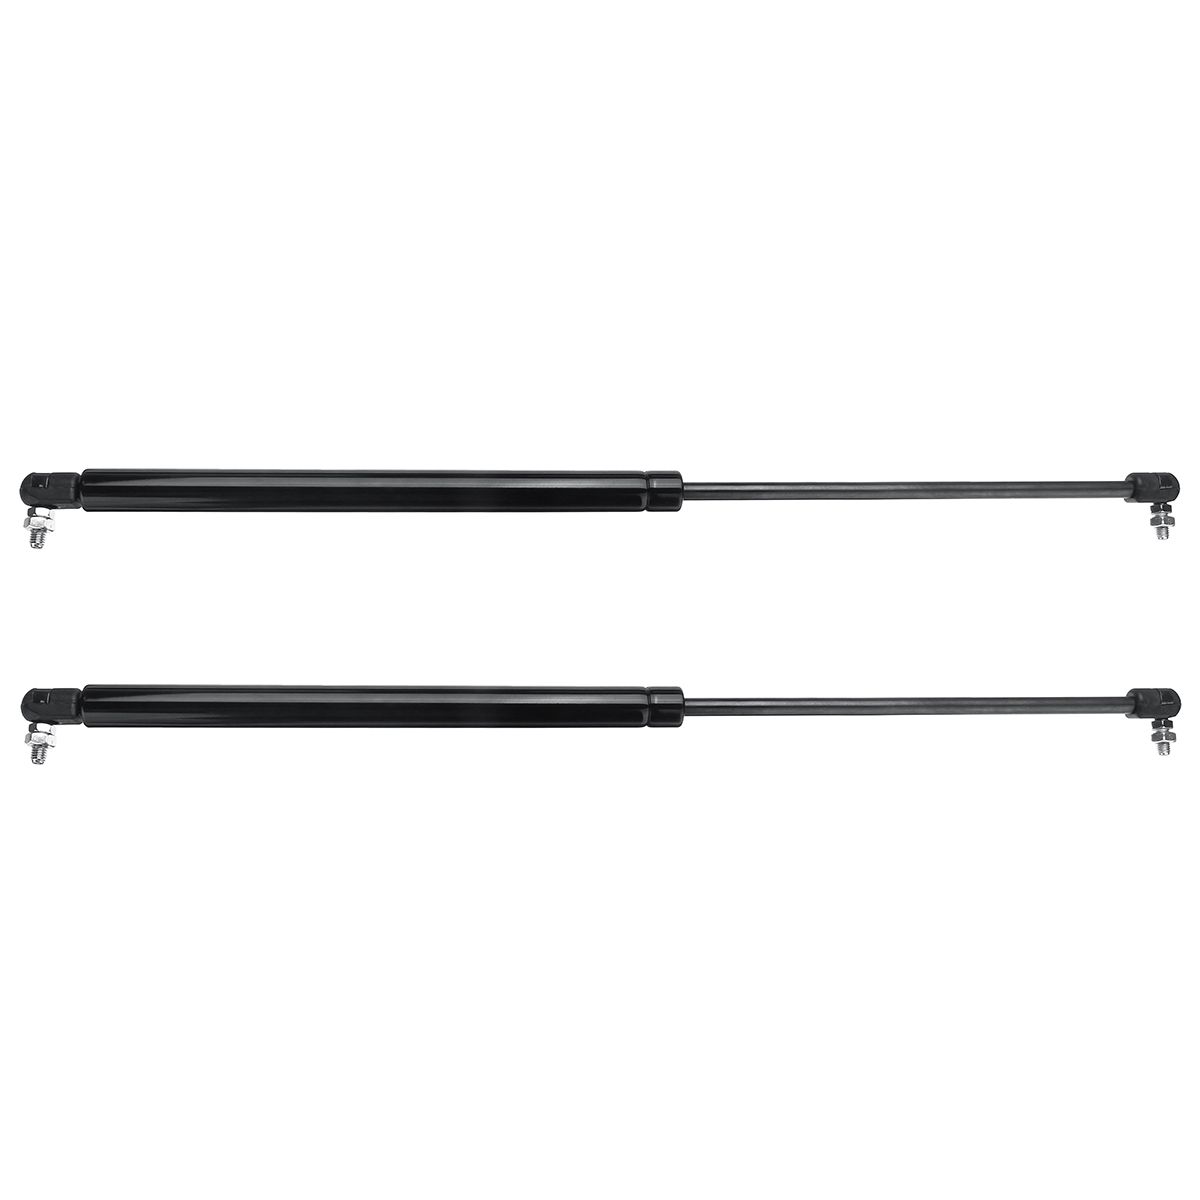 2Pcs-60cm-Car-Rear-Tailgate-Boot-Gas-Struts-Supports-Shock-Lifter-For-Caravan-for-Camper-Trailer-1560139